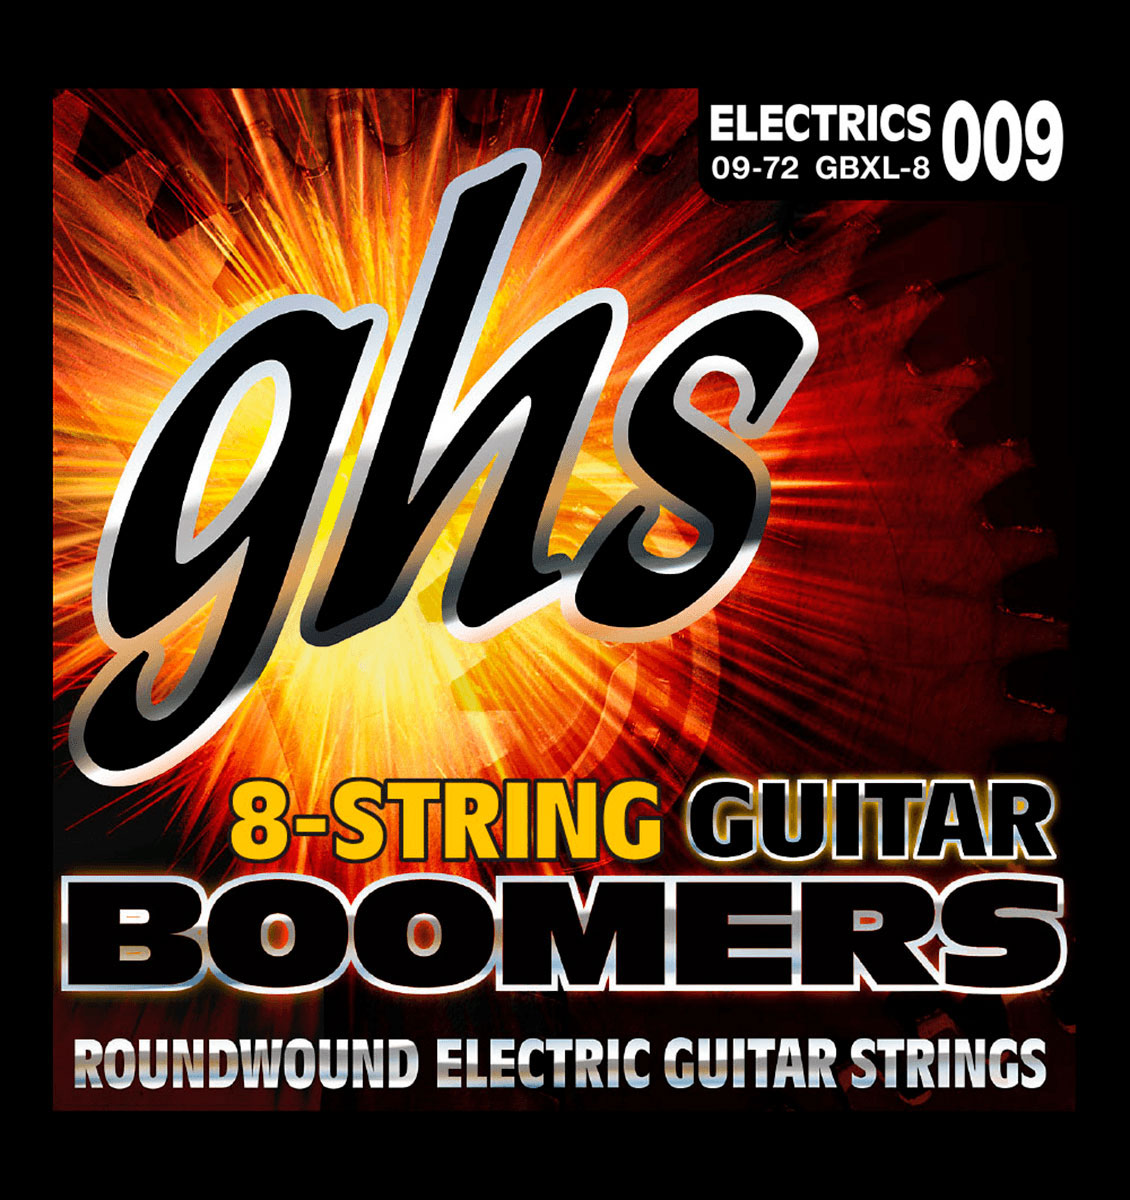 GHS GBXL-8 BOOMERS EXTRA LIGHT 8C 9-72